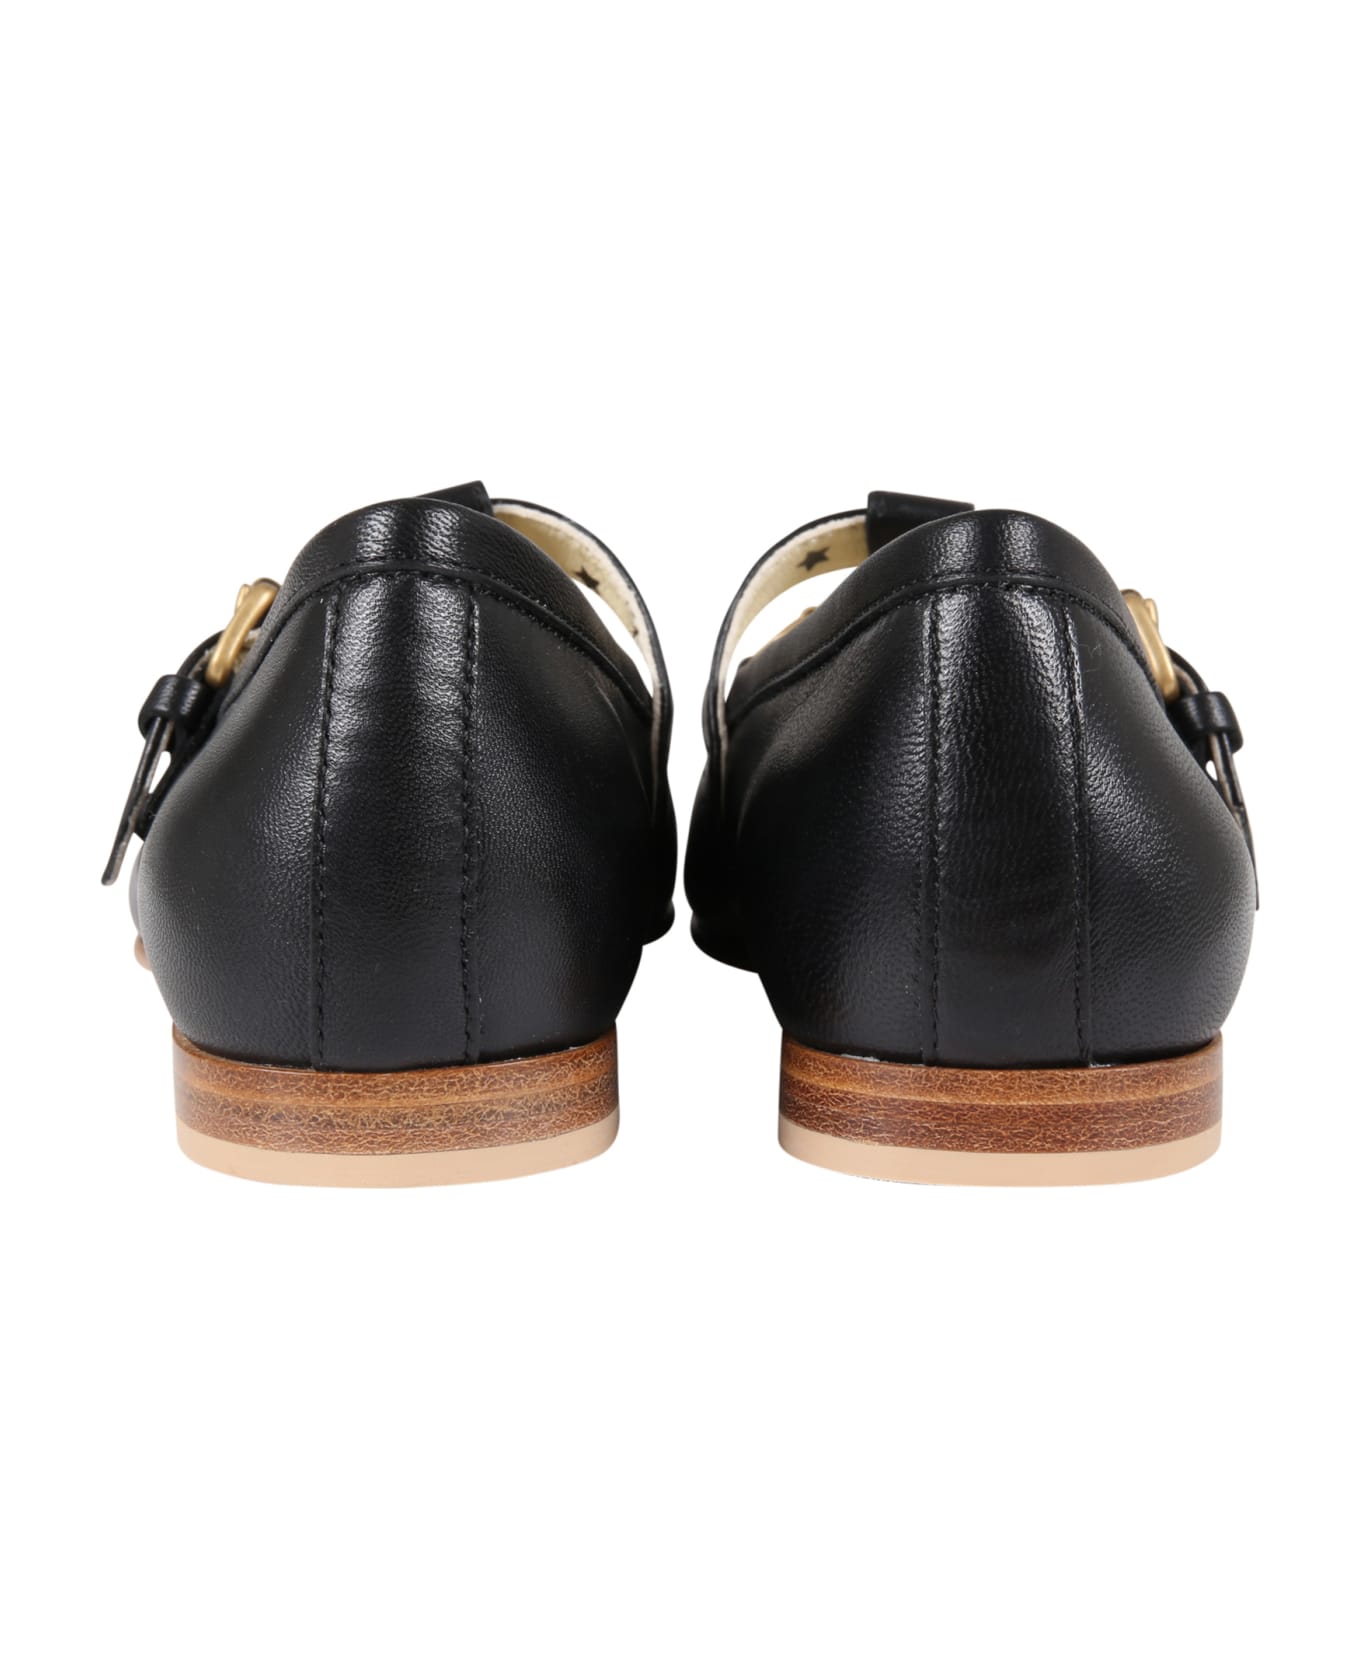 Gucci Black Loafers For Kids With Horsebit - Black シューズ